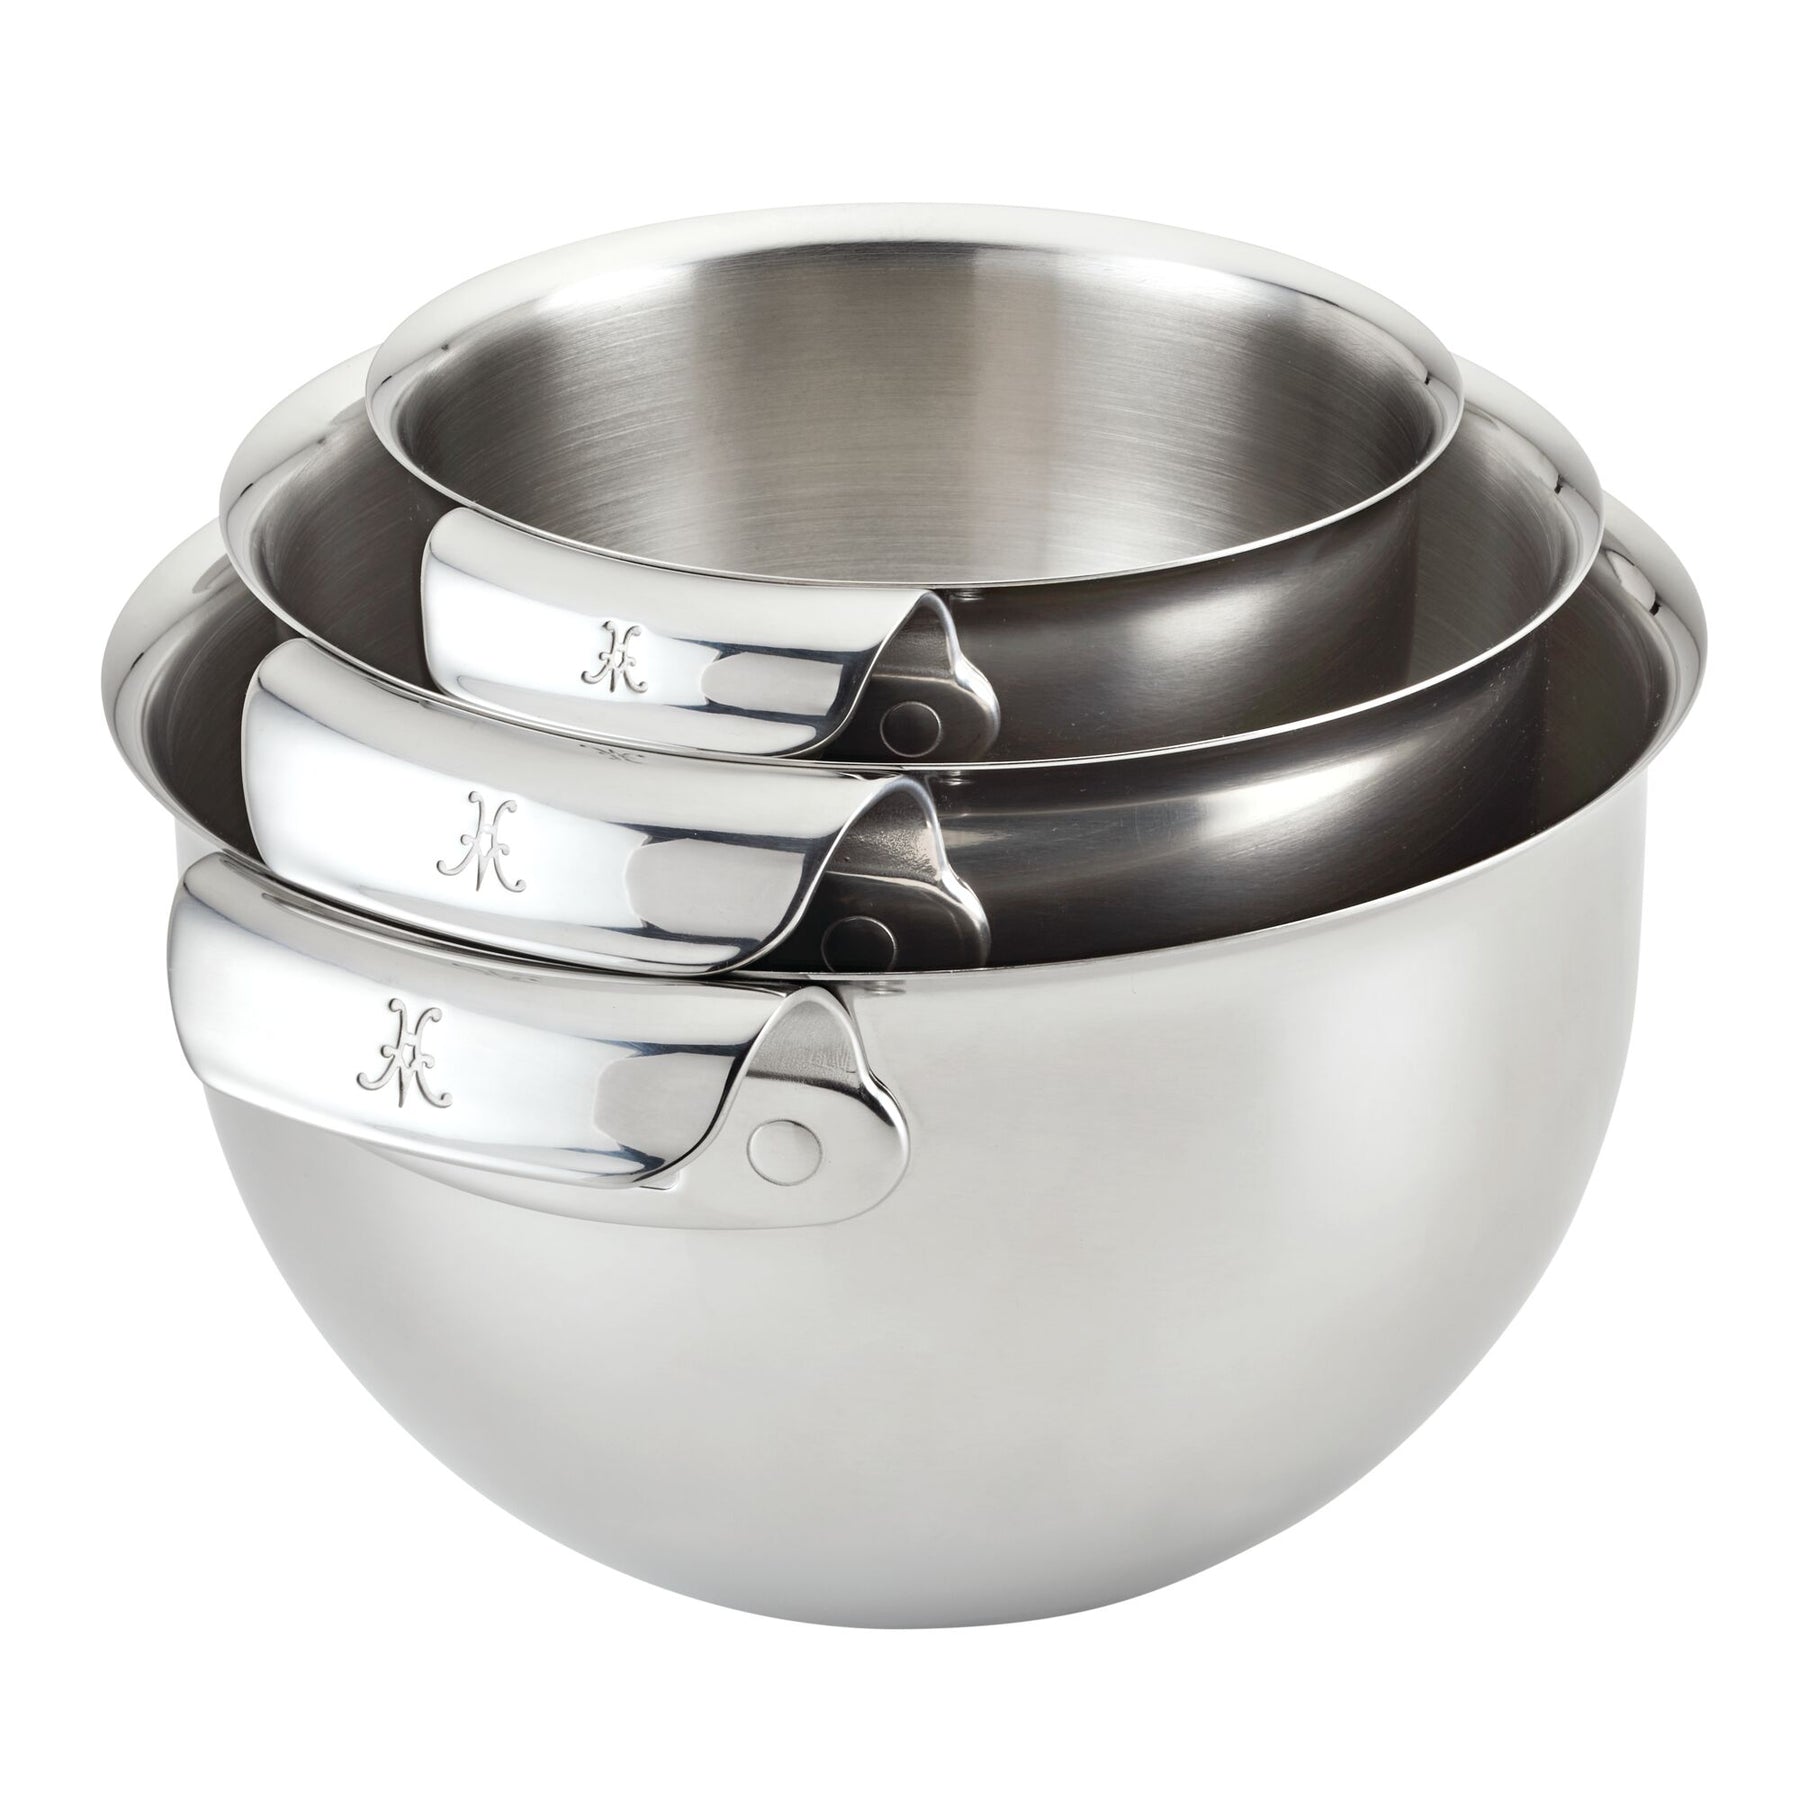 Heavy Duty Stainless Steel German 3 Large Nested Mixing Bowl Set